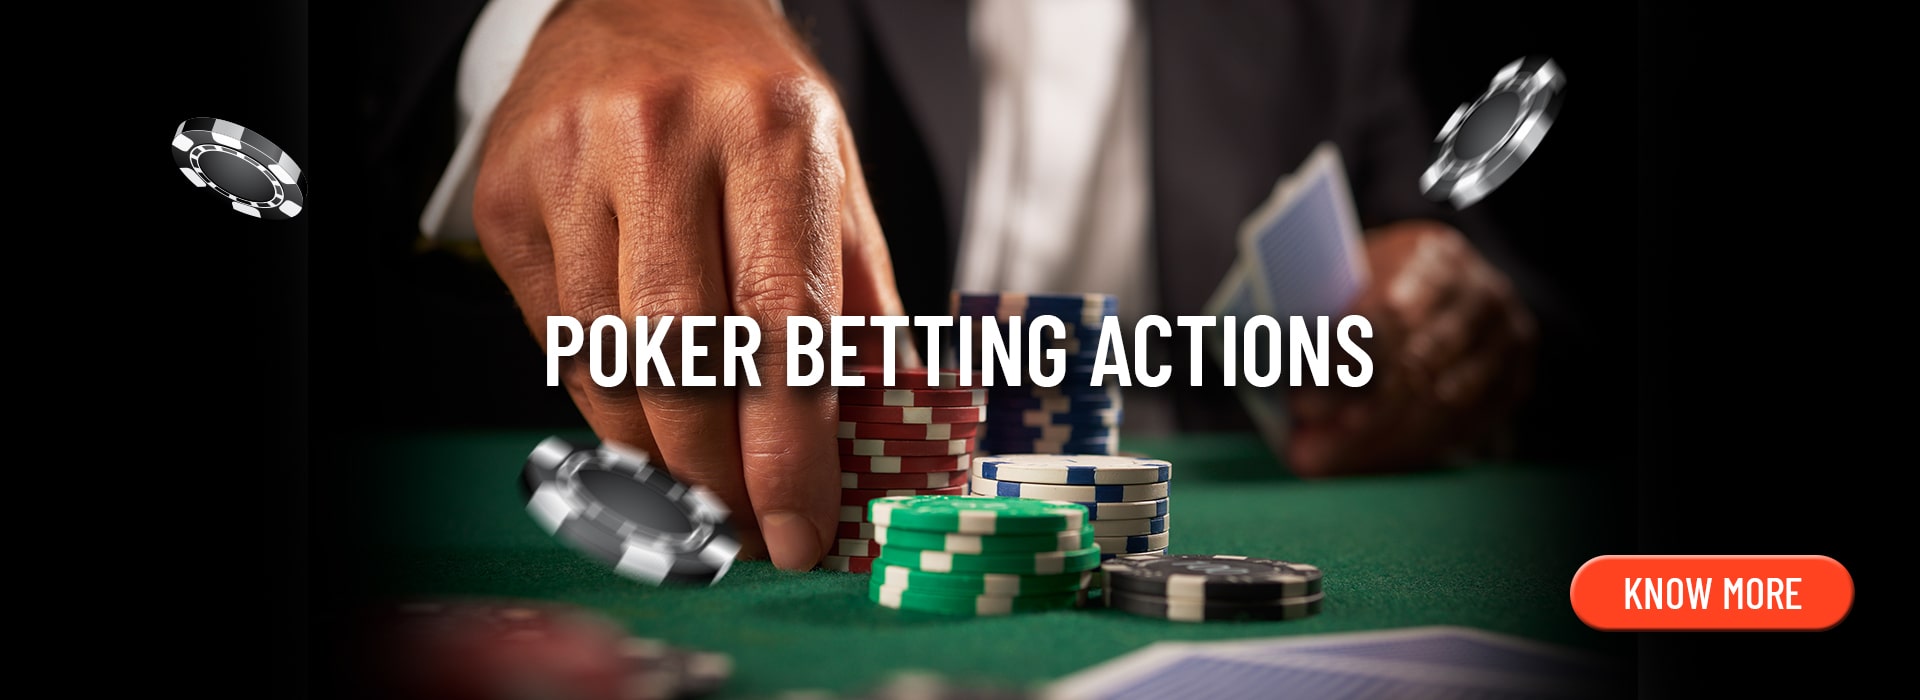 Poker betting actions